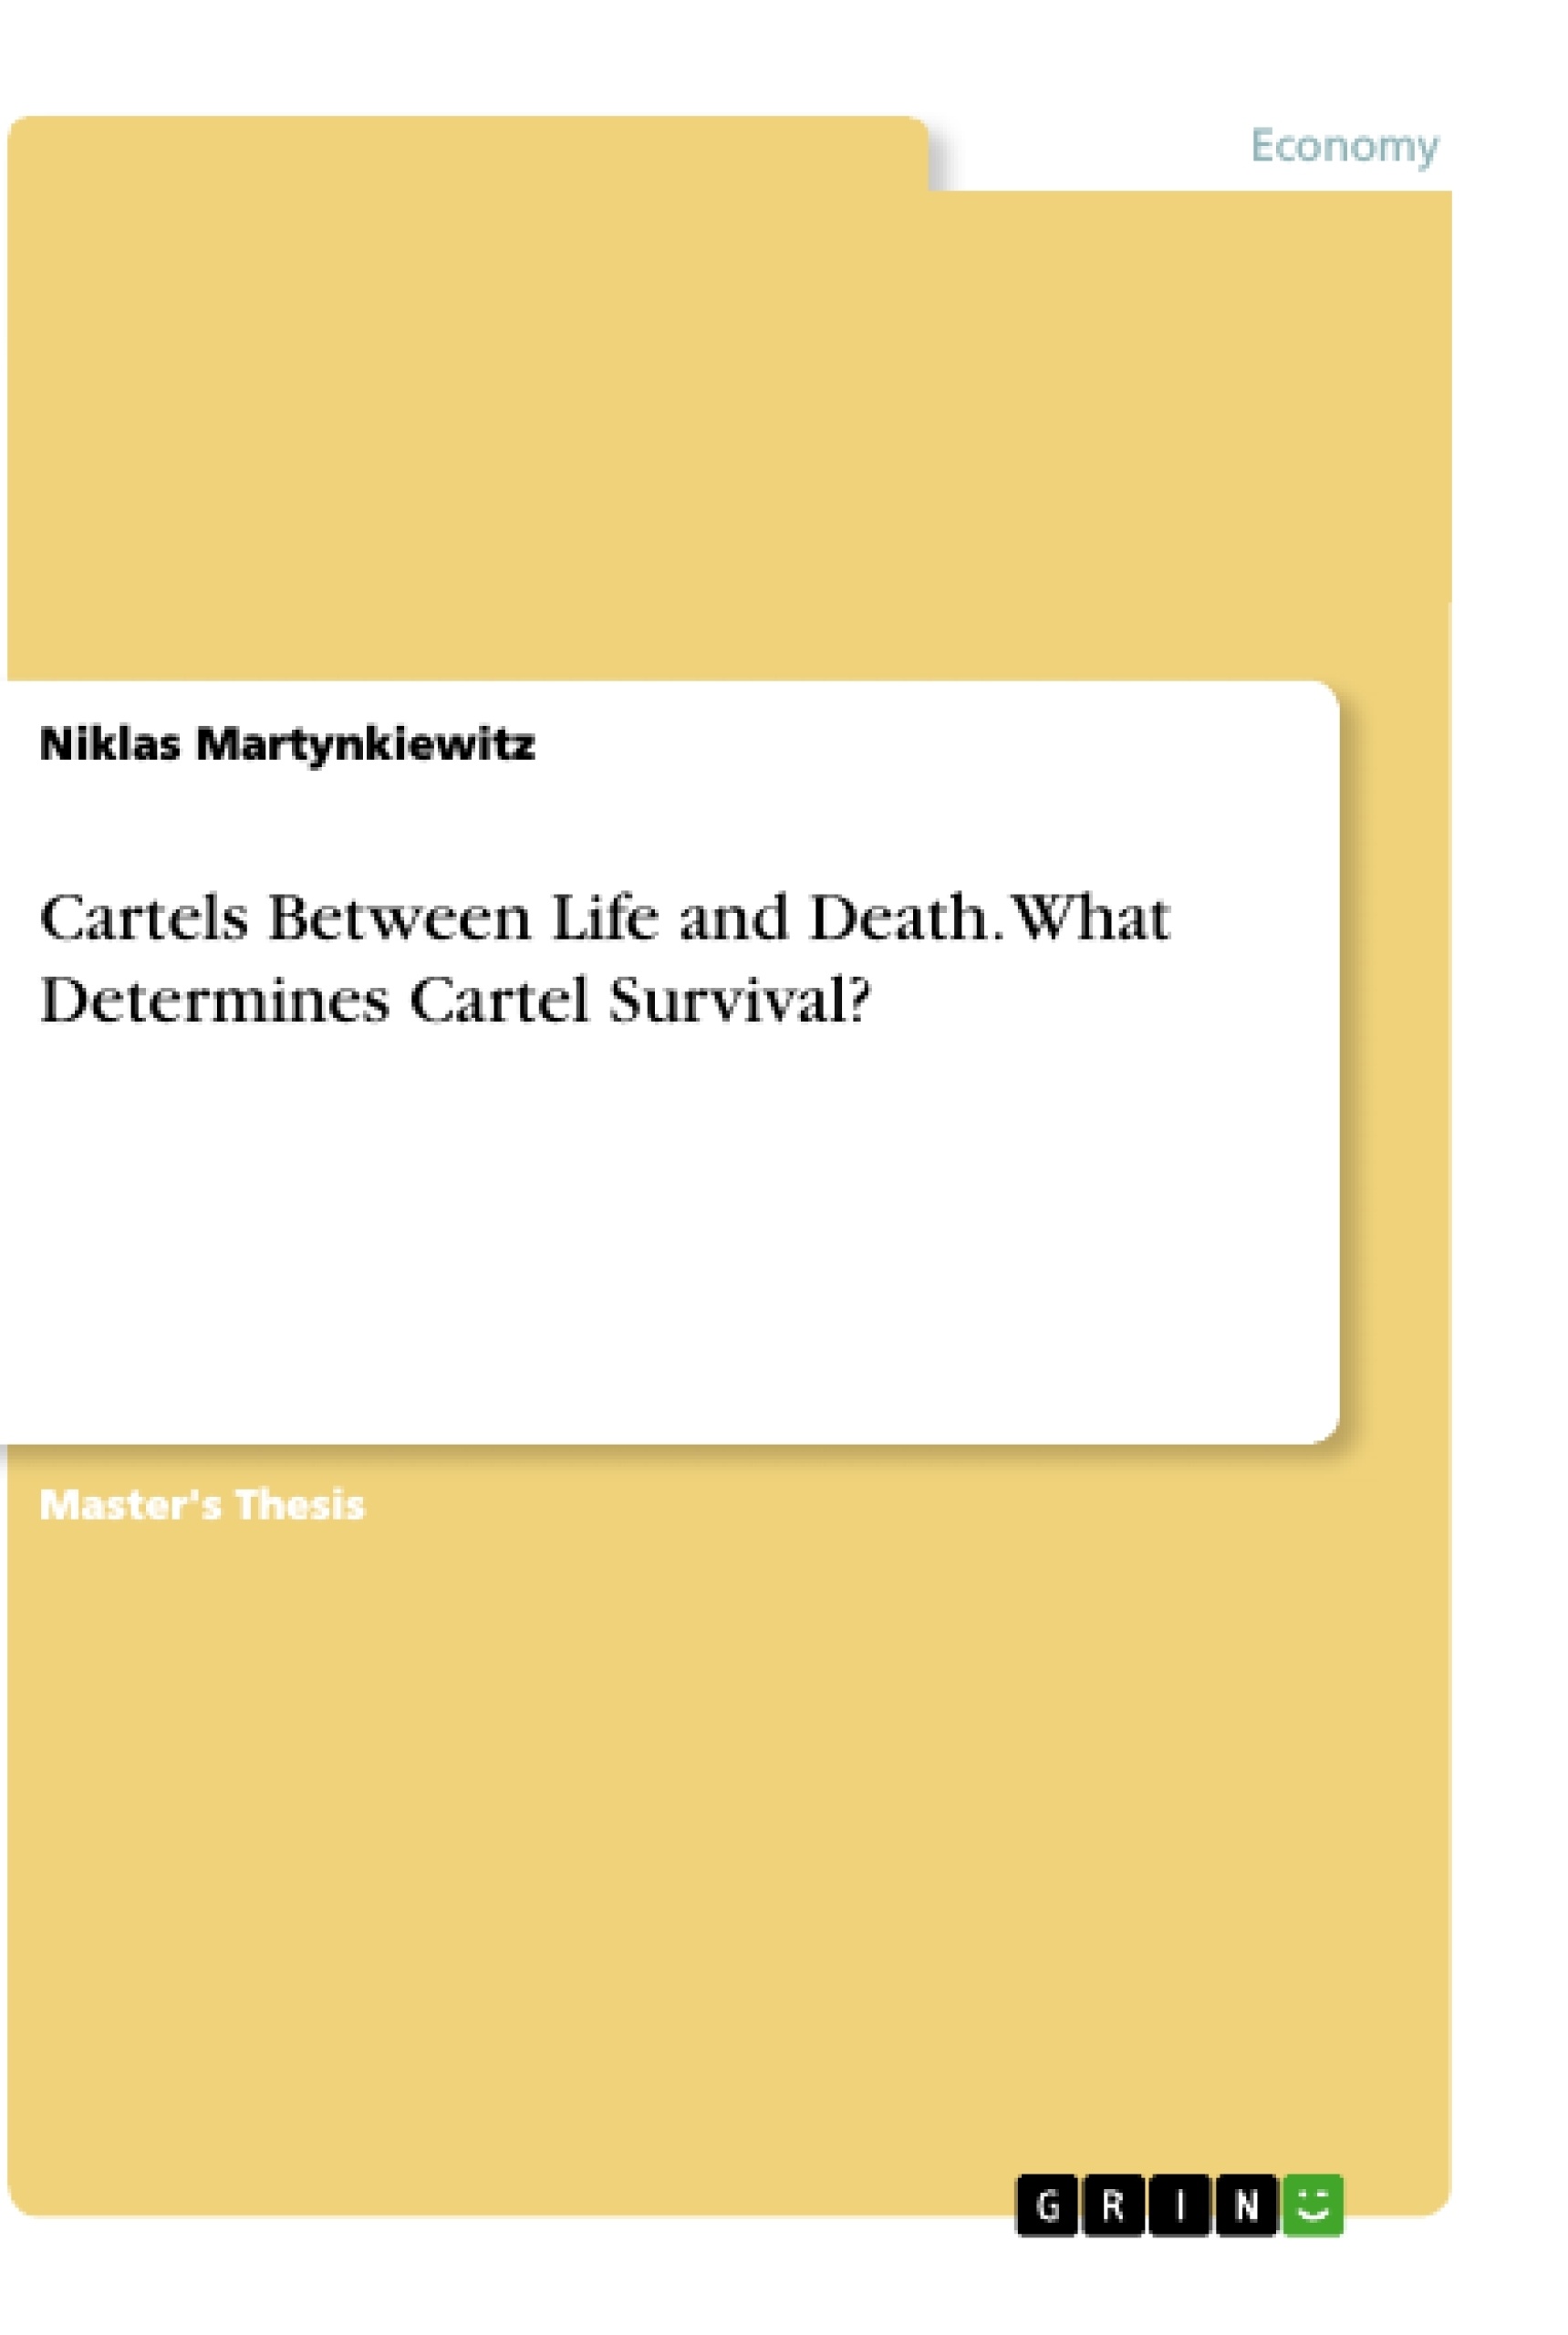 Título: Cartels Between Life and Death. What Determines Cartel Survival?